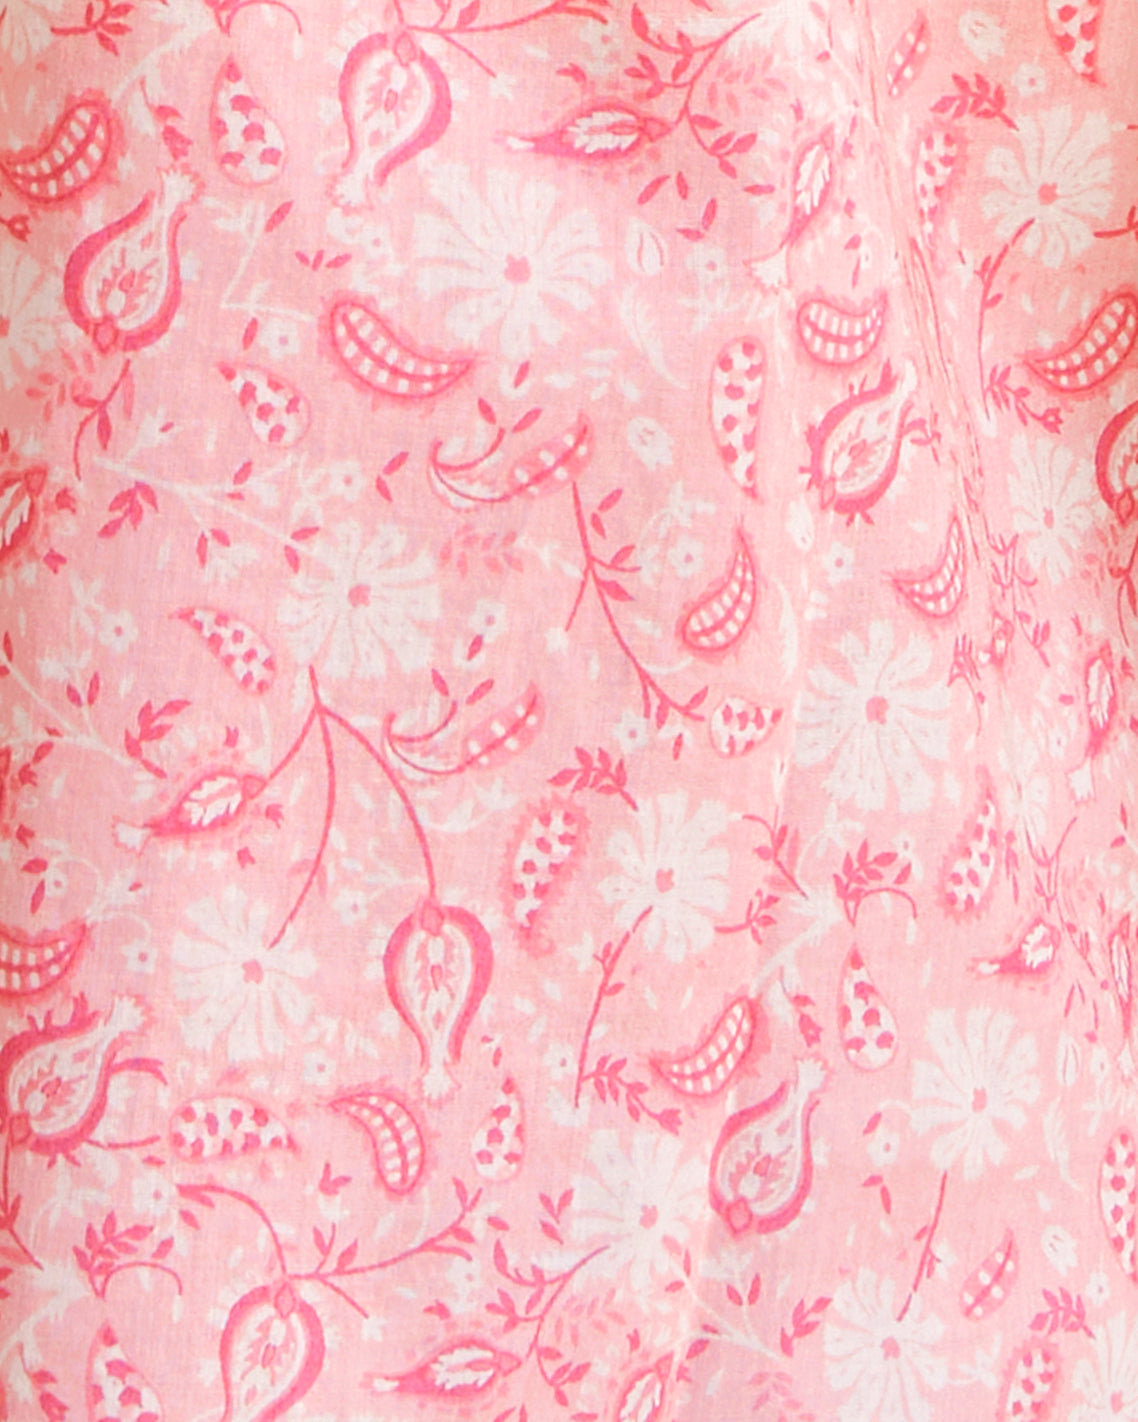 Donna Top in Pink Paisley